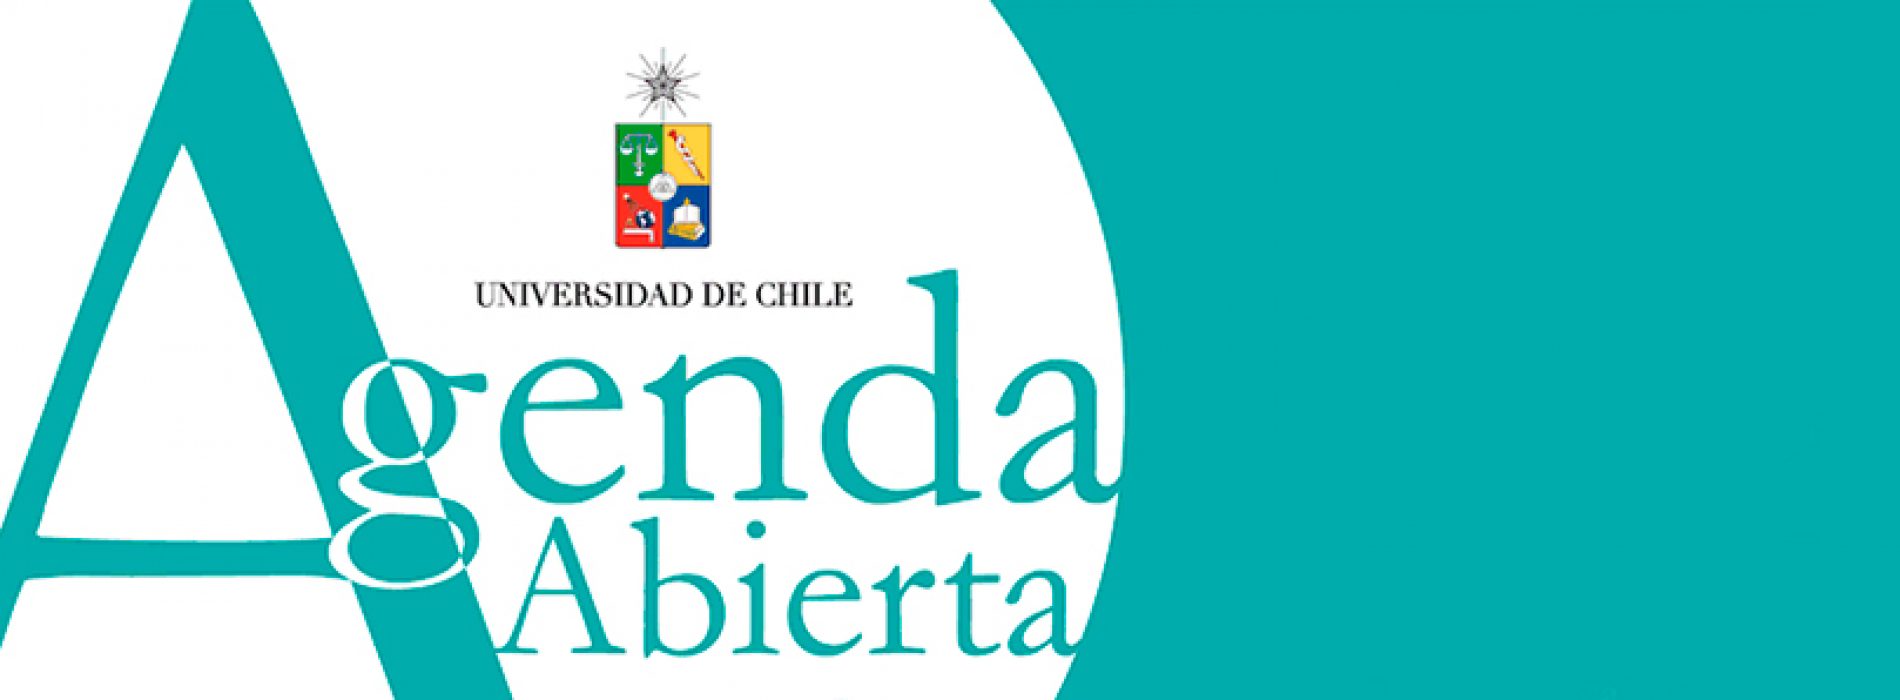 "The Chile invites". Check out their activities in January